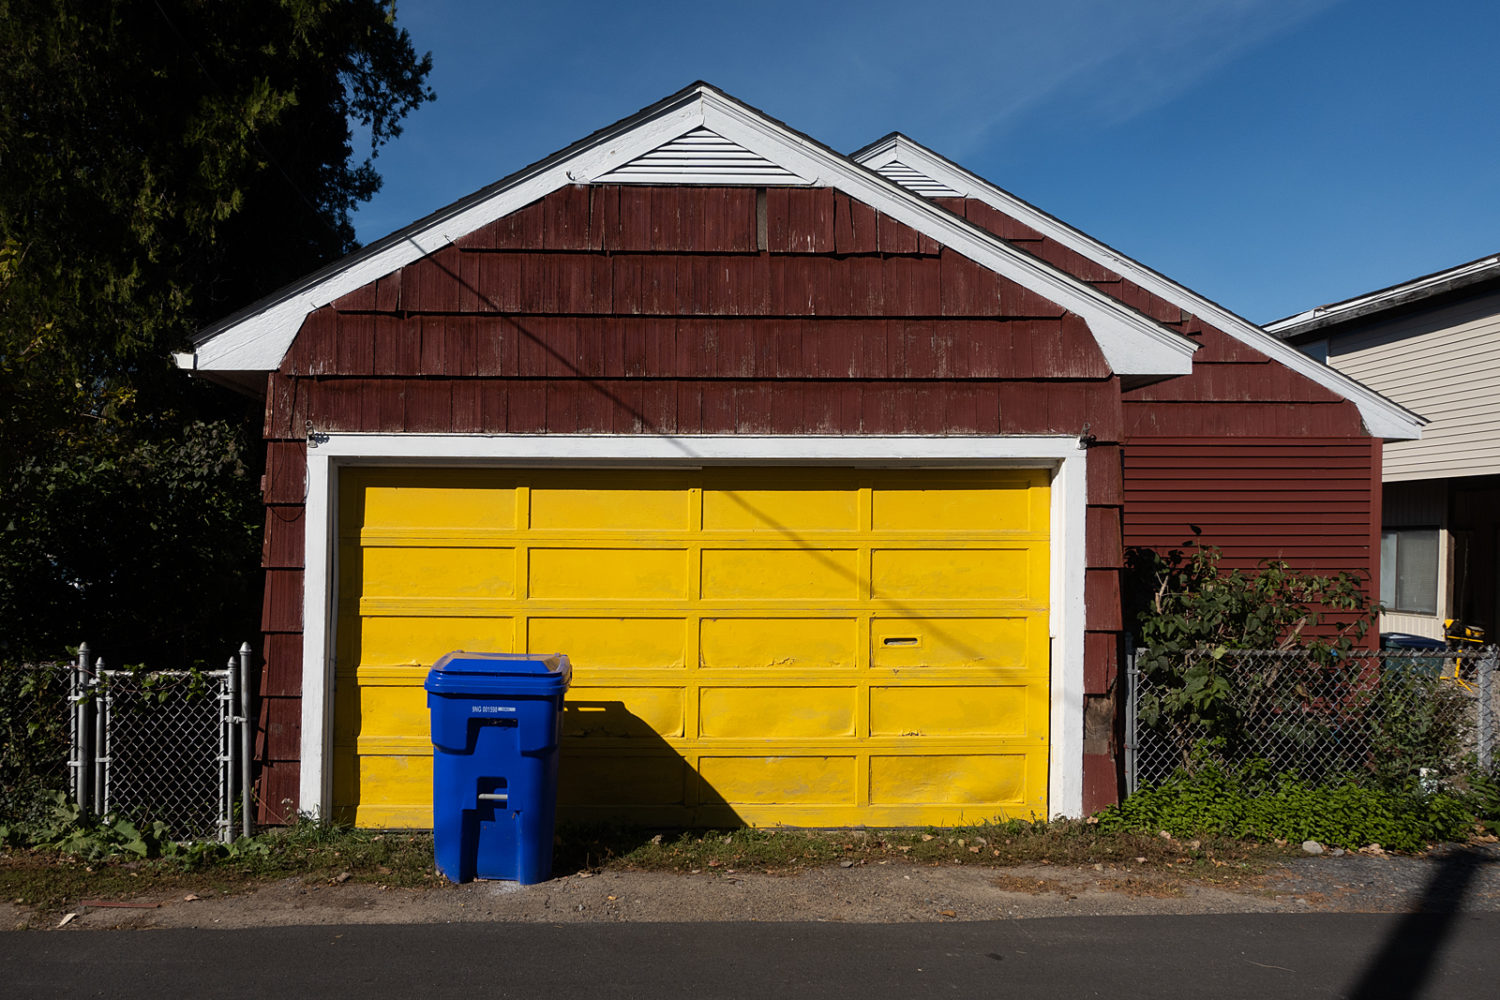 Red garage with yellow door and blue trash can in Olcott, New York